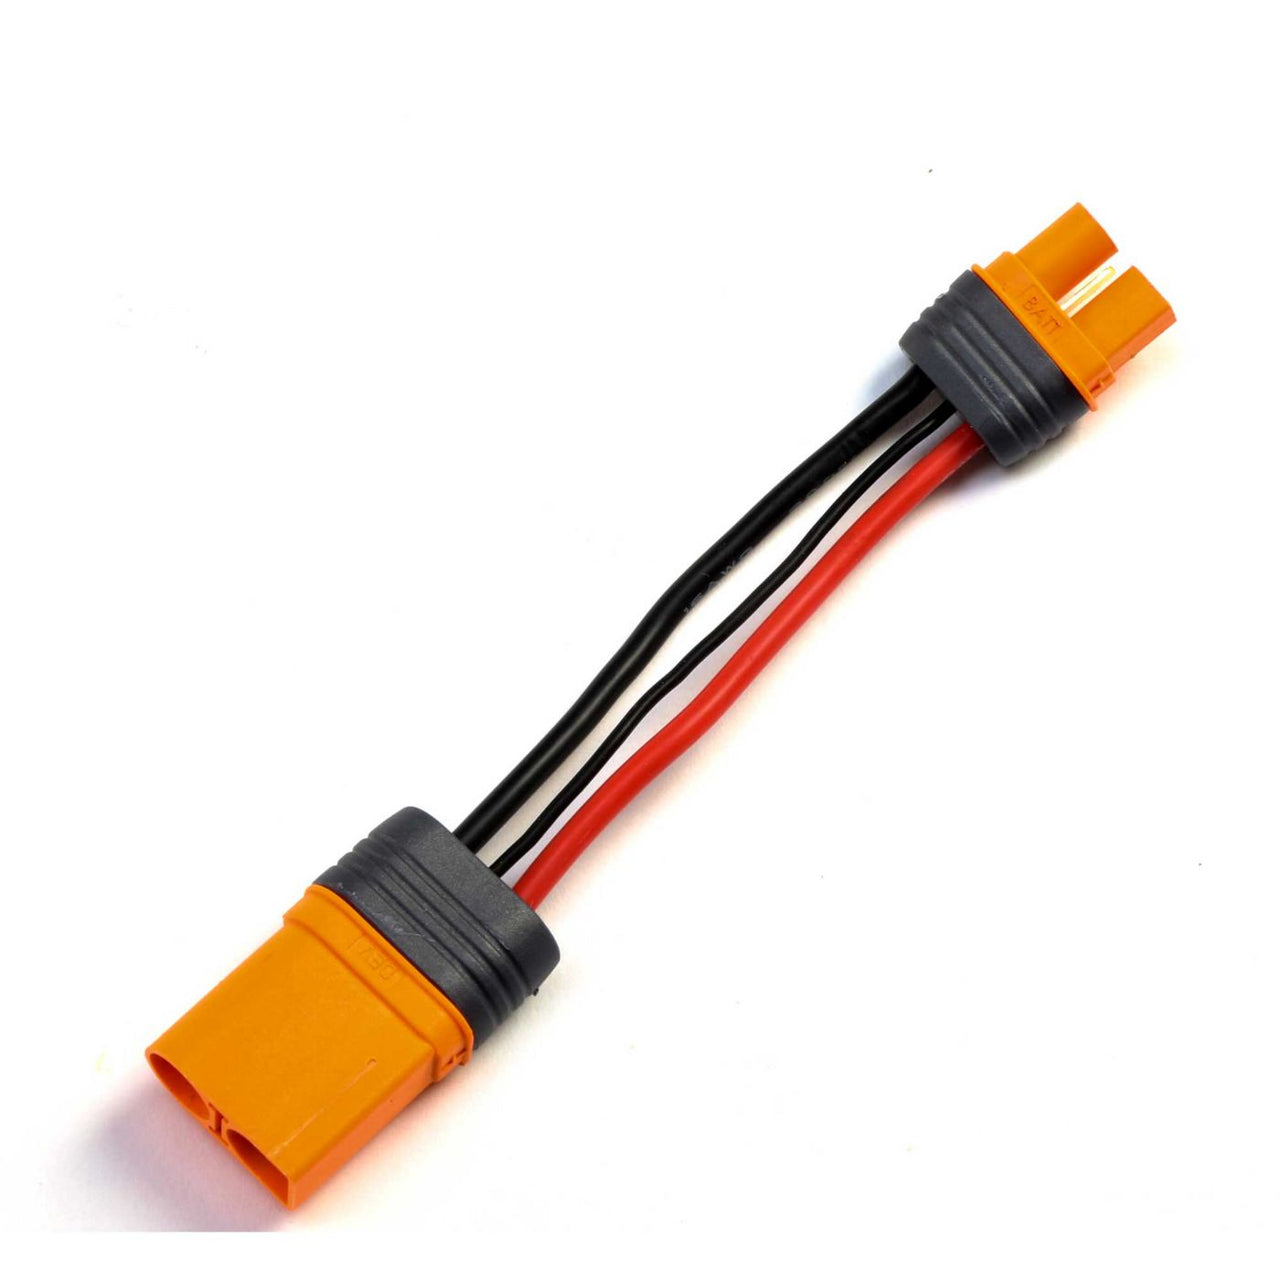 SPMXCA507 Adapter: IC3 Battery / IC5 Device, 4"/100mm Wire 10 AWG